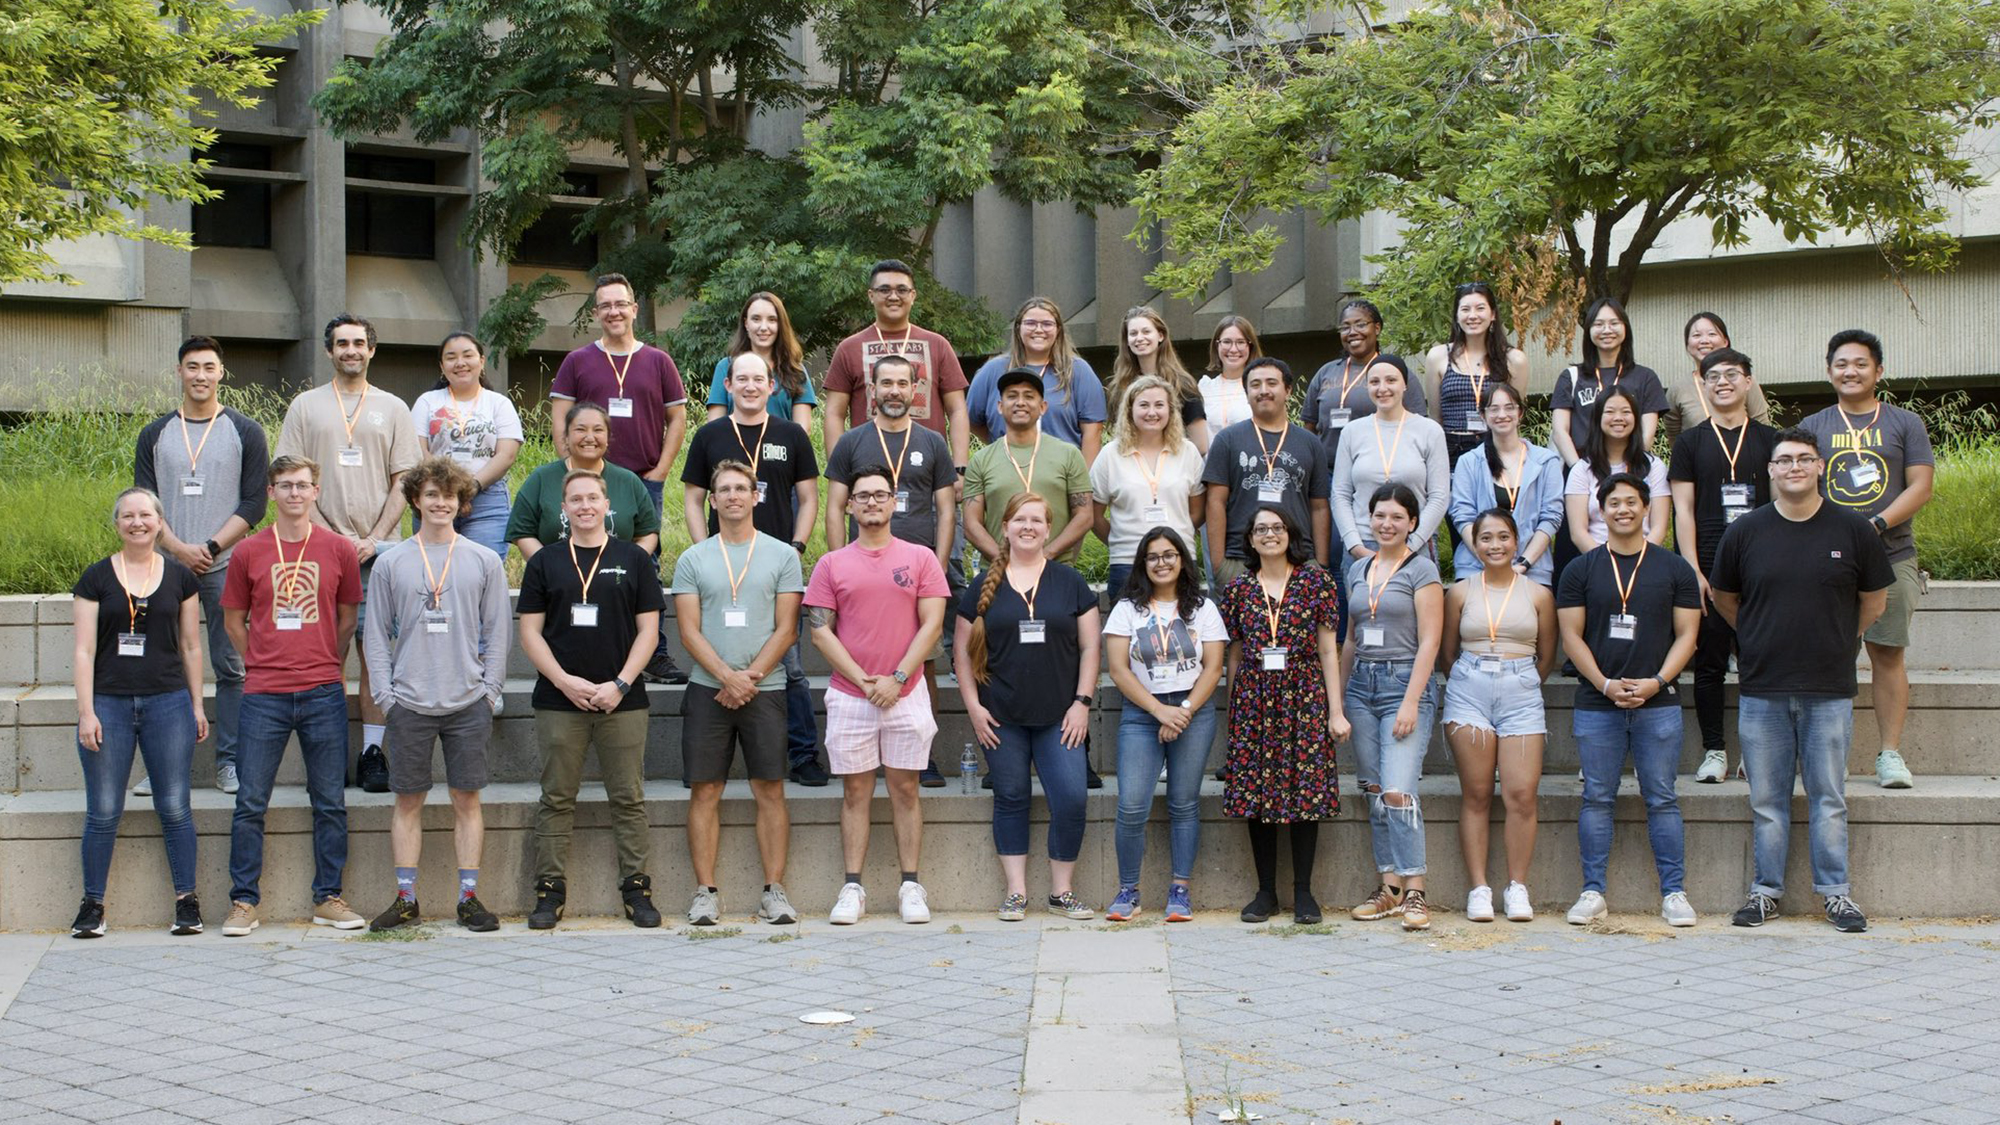 Bolivar co-founded the California Emerging Scientist Workshop, a 5-day workshop that introduces early-career researchers to the fundamentals of microscopy and analysis. The premiere workshop, whose participants are shown here, was conducted in August 2023 at UC Davis in partnership with the Advanced Imaging Center at HHMI Janelia. (Courtesy of Jessica Bolivar)